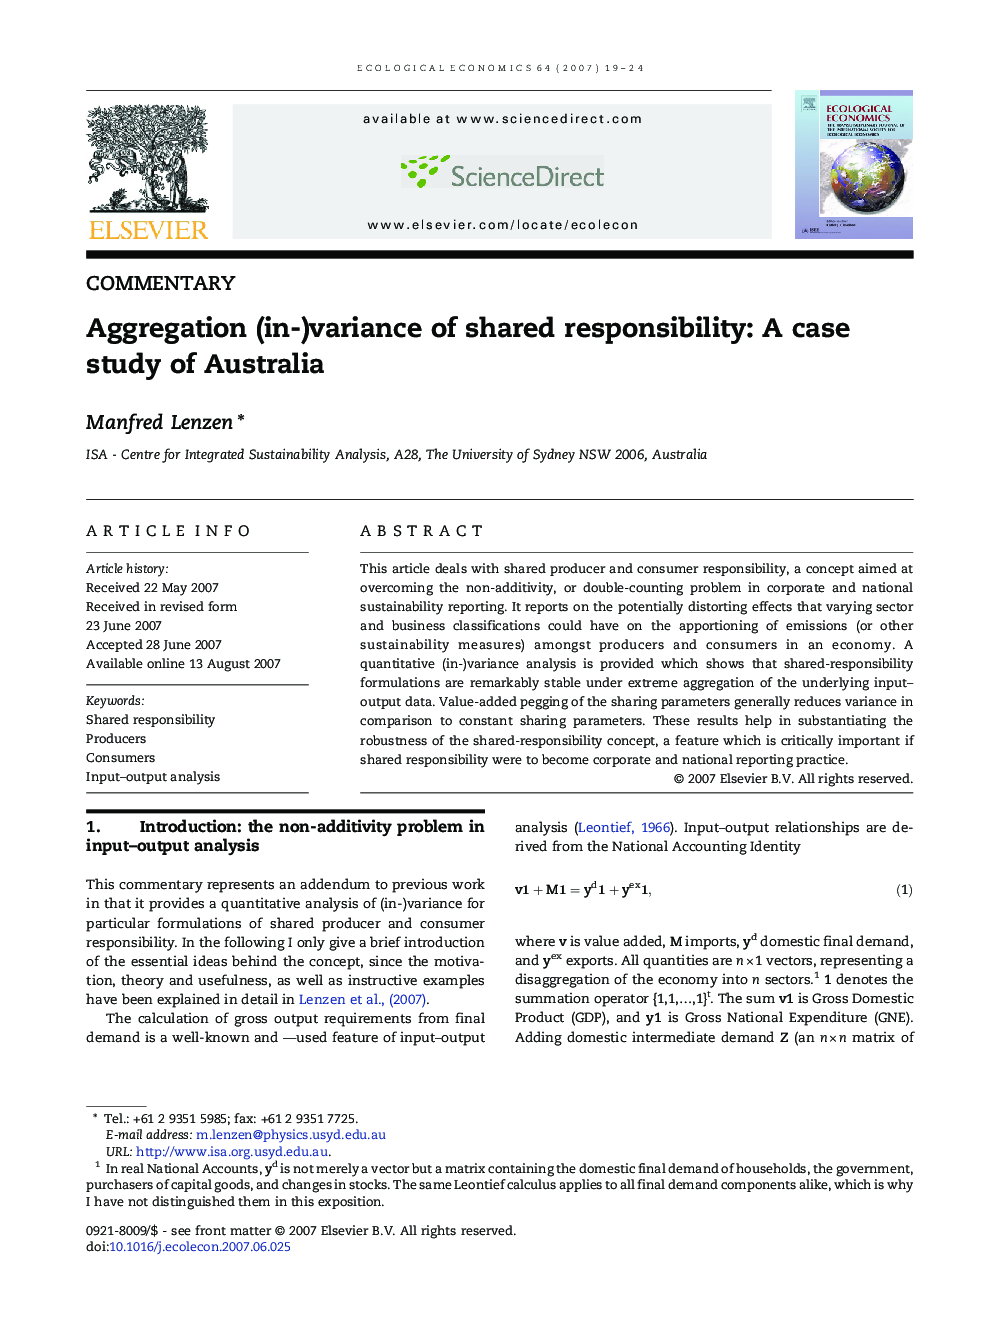 Aggregation (in-)variance of shared responsibility: A case study of Australia